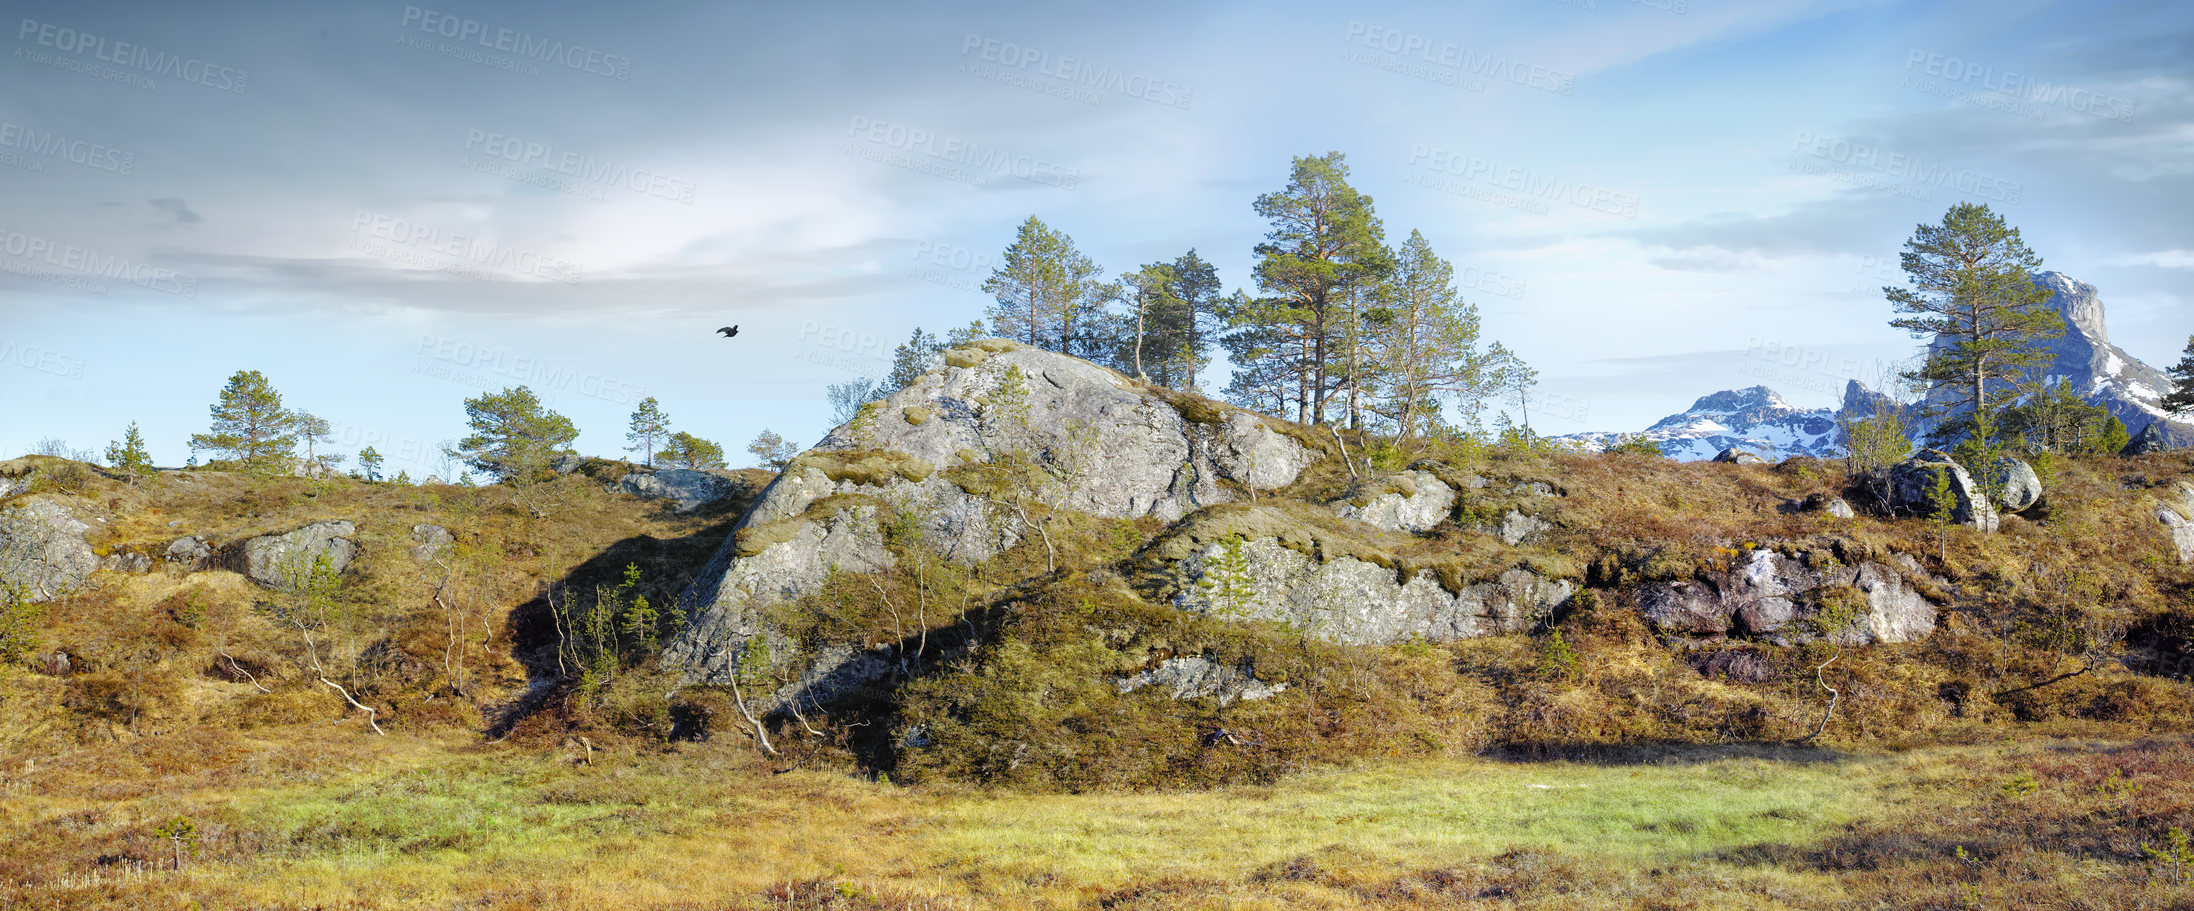 Buy stock photo Lush rocky wilderness with wild trees and grass against a blue sky copy space background. Peaceful scenic landscape of empty natural woodland to travel and explore in the countryside of Bodo, Noway